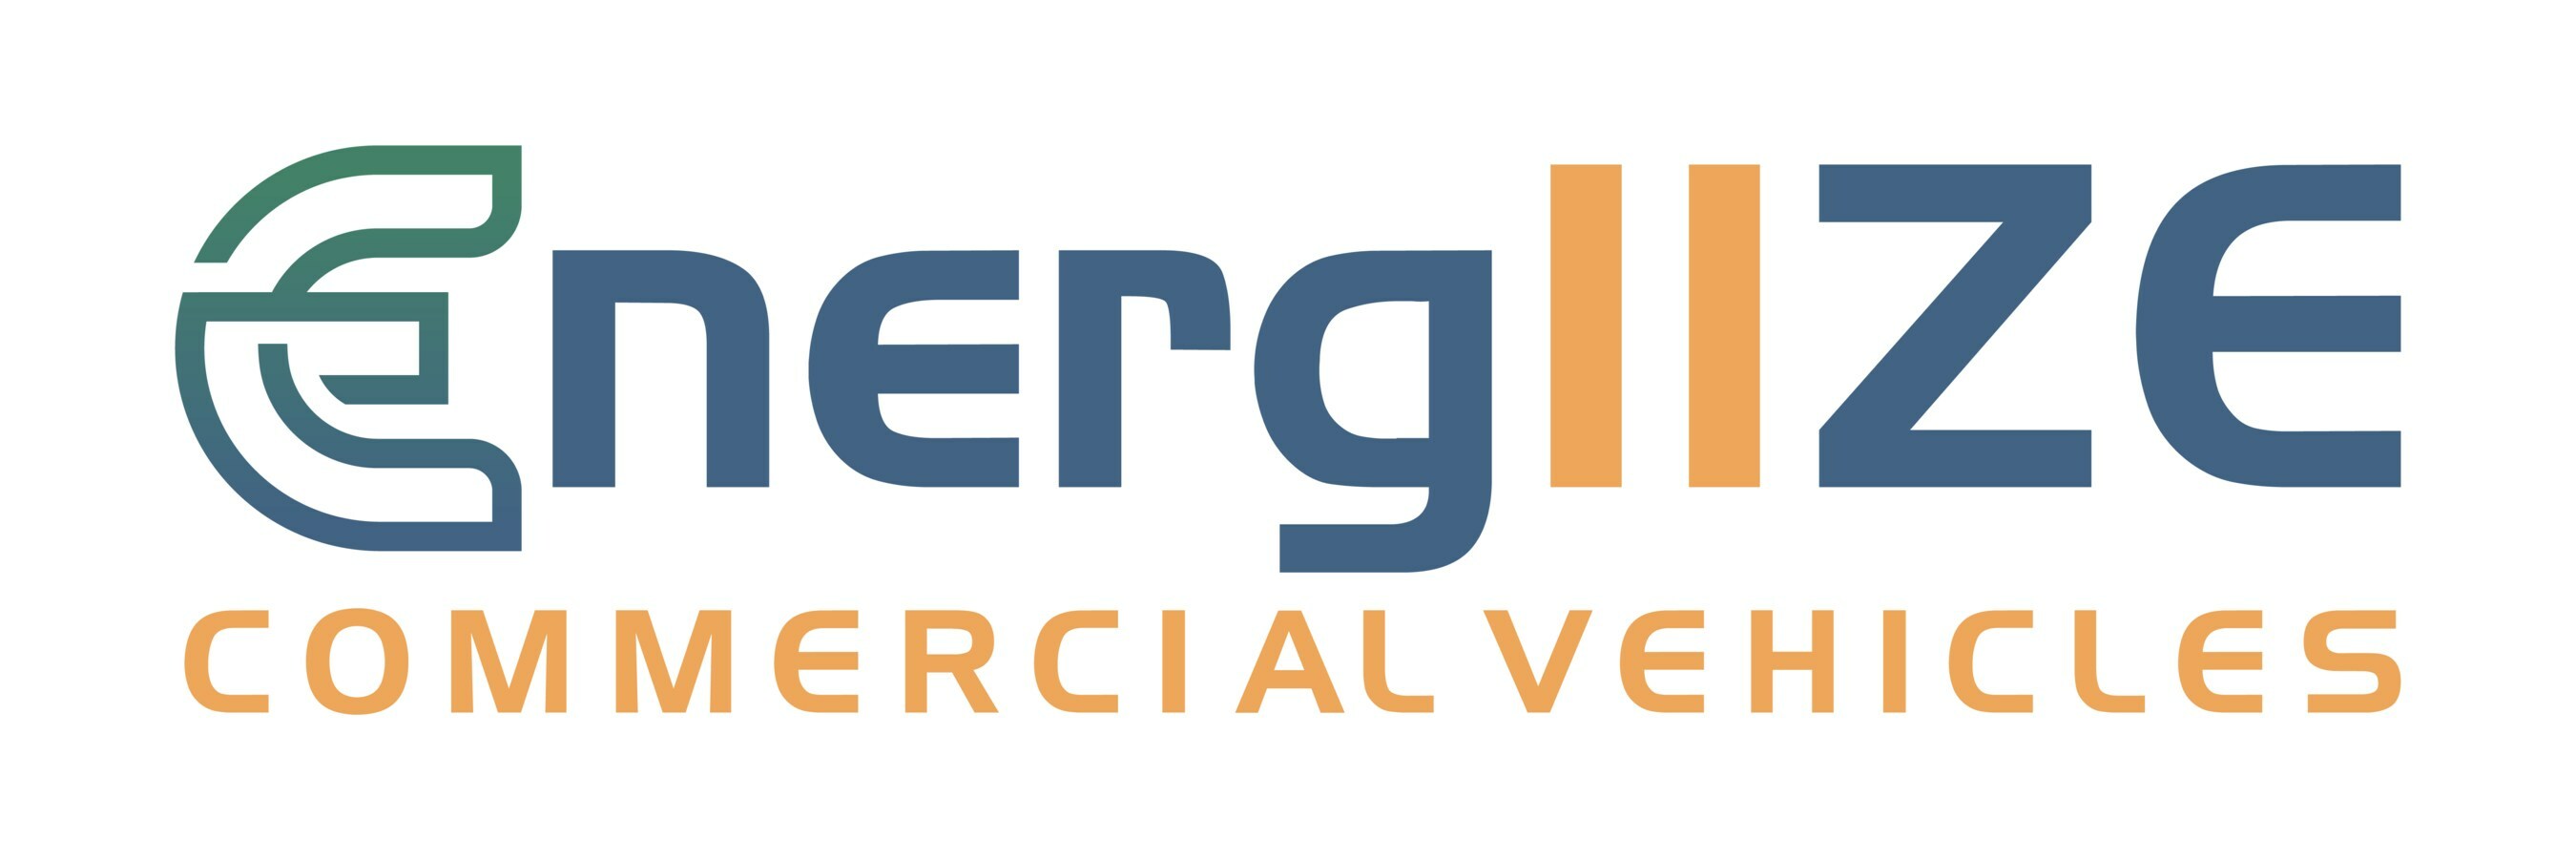 Applications to the EnergIIZE Project will be accepted on a first-come, first-served basis and incentives are expected to be fully subscribed in minutes. Image: EnergIIZE Commercial Vehicles